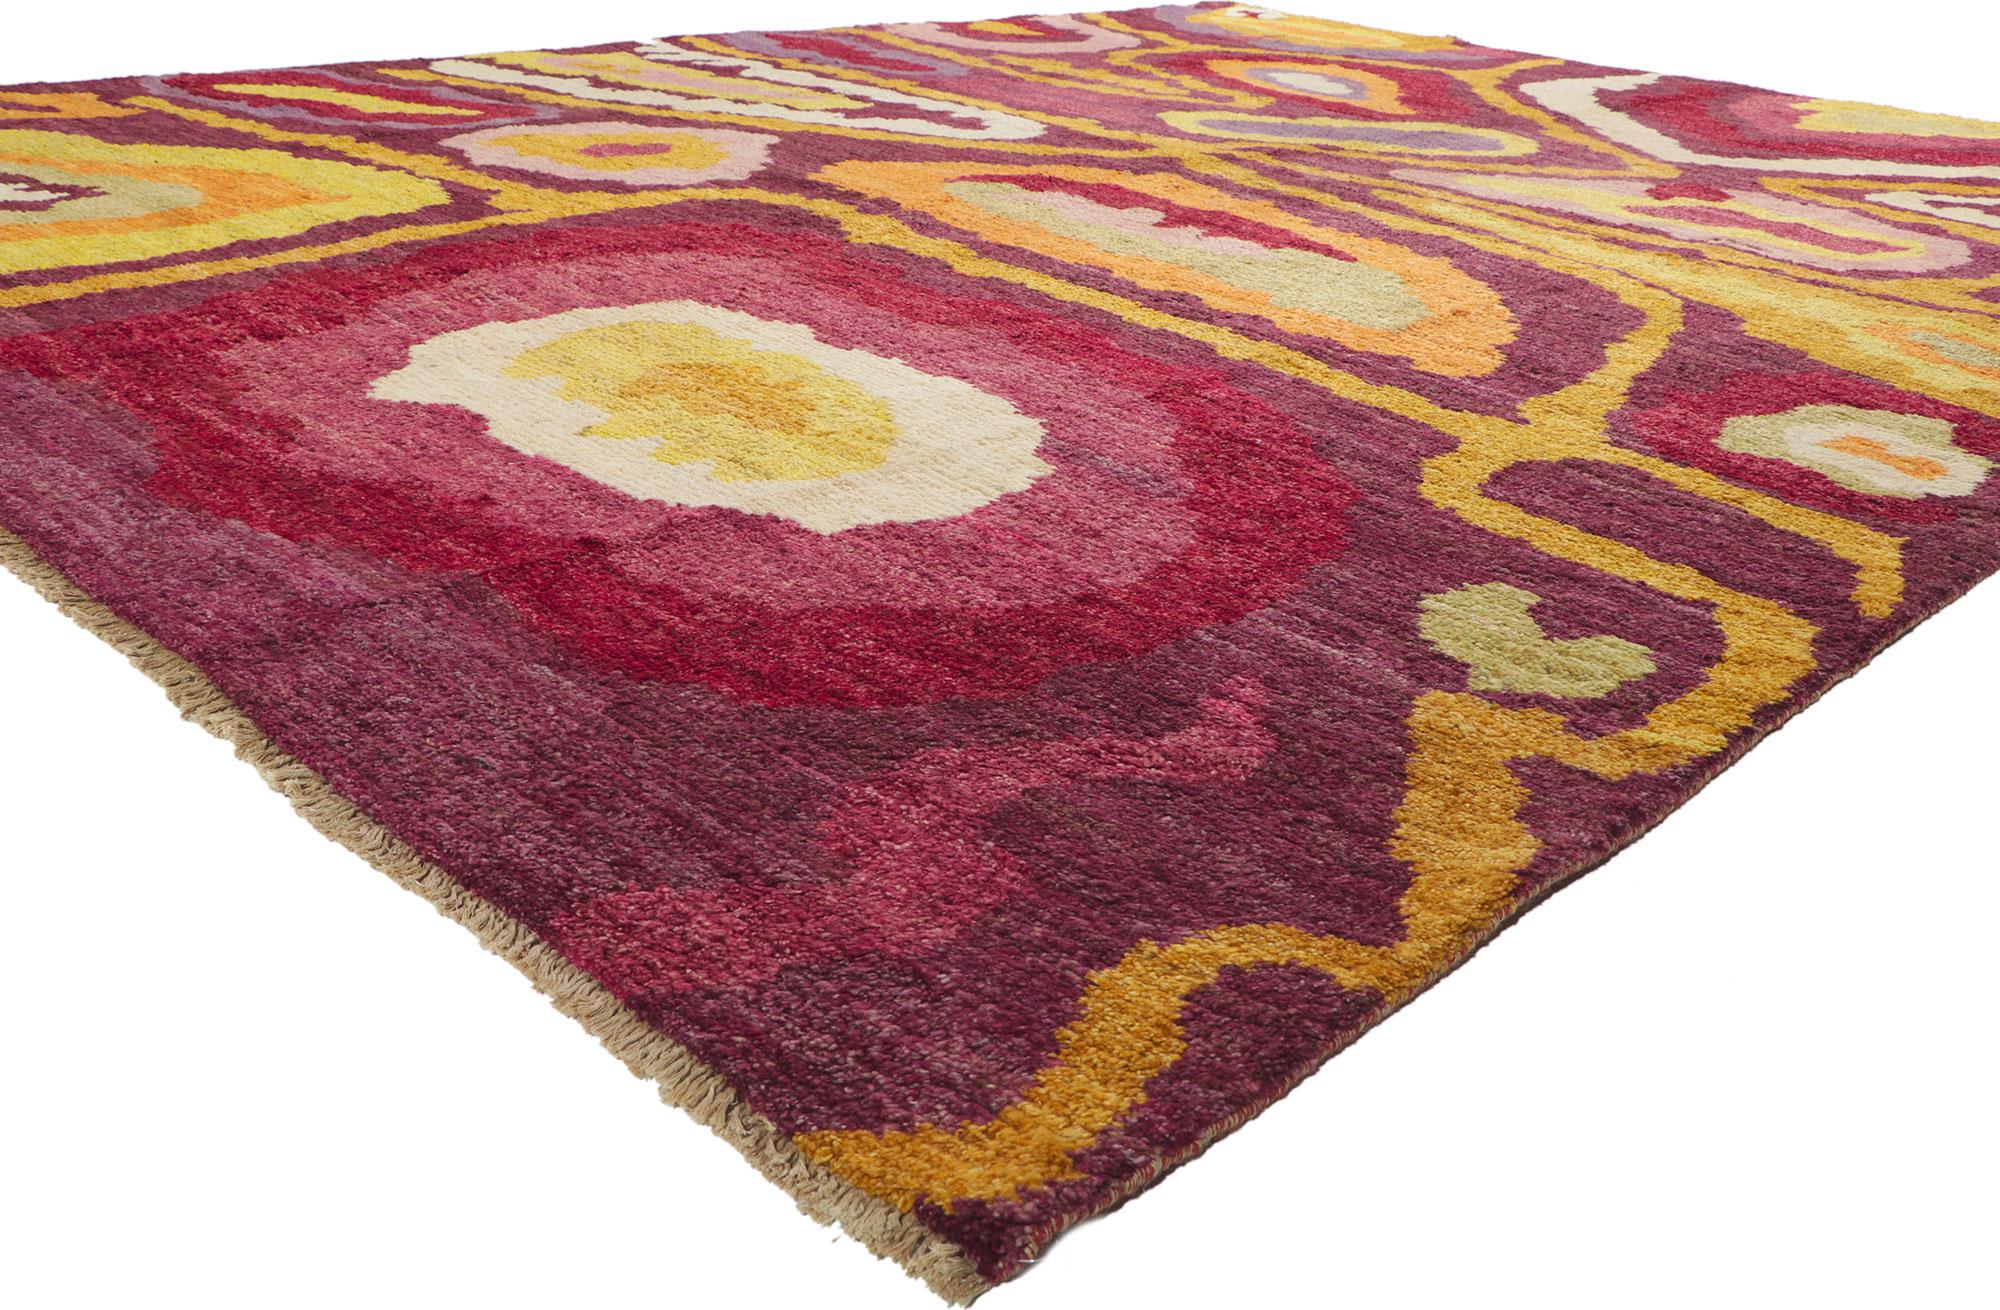 80378 New Colorful Moroccan Area Rug with Orphism Style 10'05 x 13'08.
Emanating biomorphic design with incredible detail and texture, this colorful Moroccan area rug is a captivating vision of woven beauty. The eye-catching amorphous pattern and